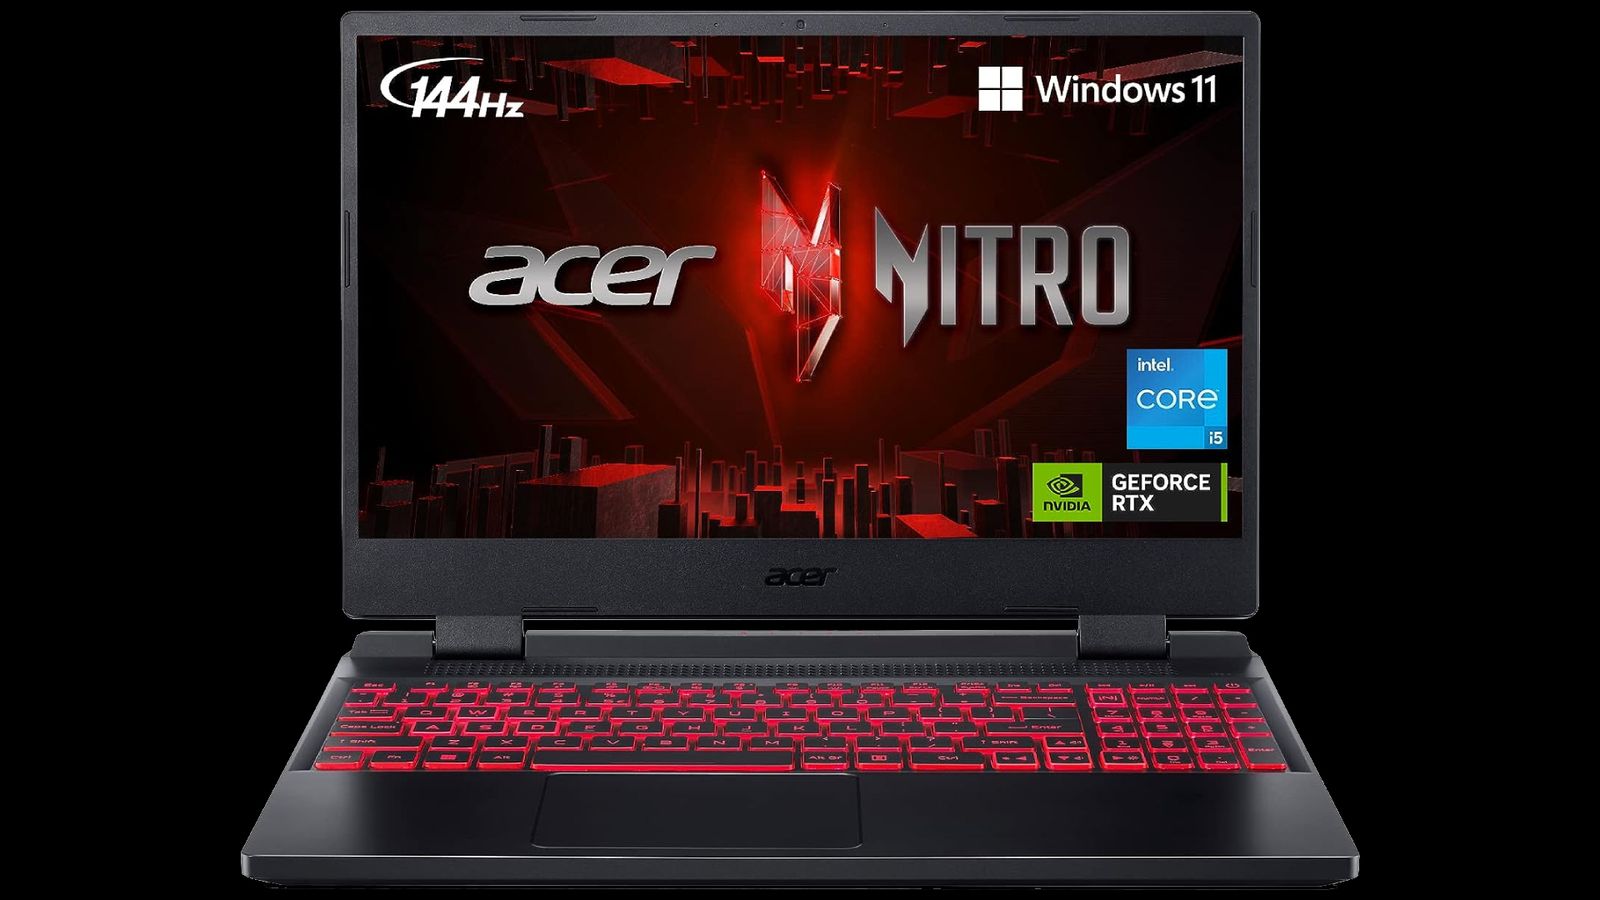 Acer Nitro 5 product image of a black laptop with red backlit keys and silver Acer branding on a red background on the screen.